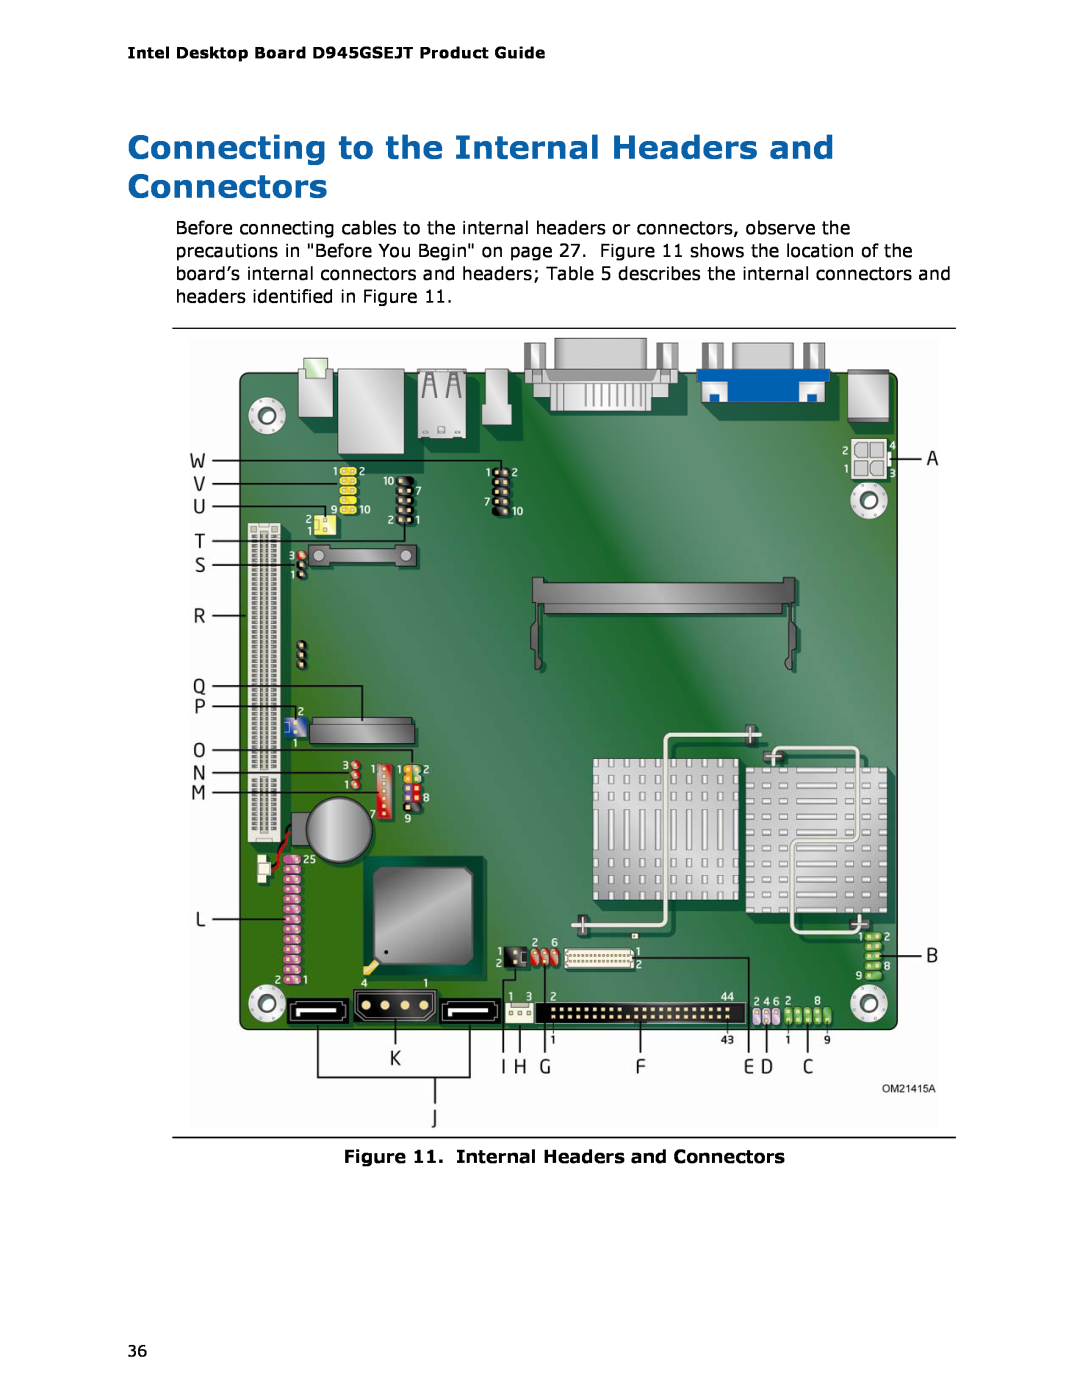 Intel D945GSEJT manual Connecting to the Internal Headers and Connectors 